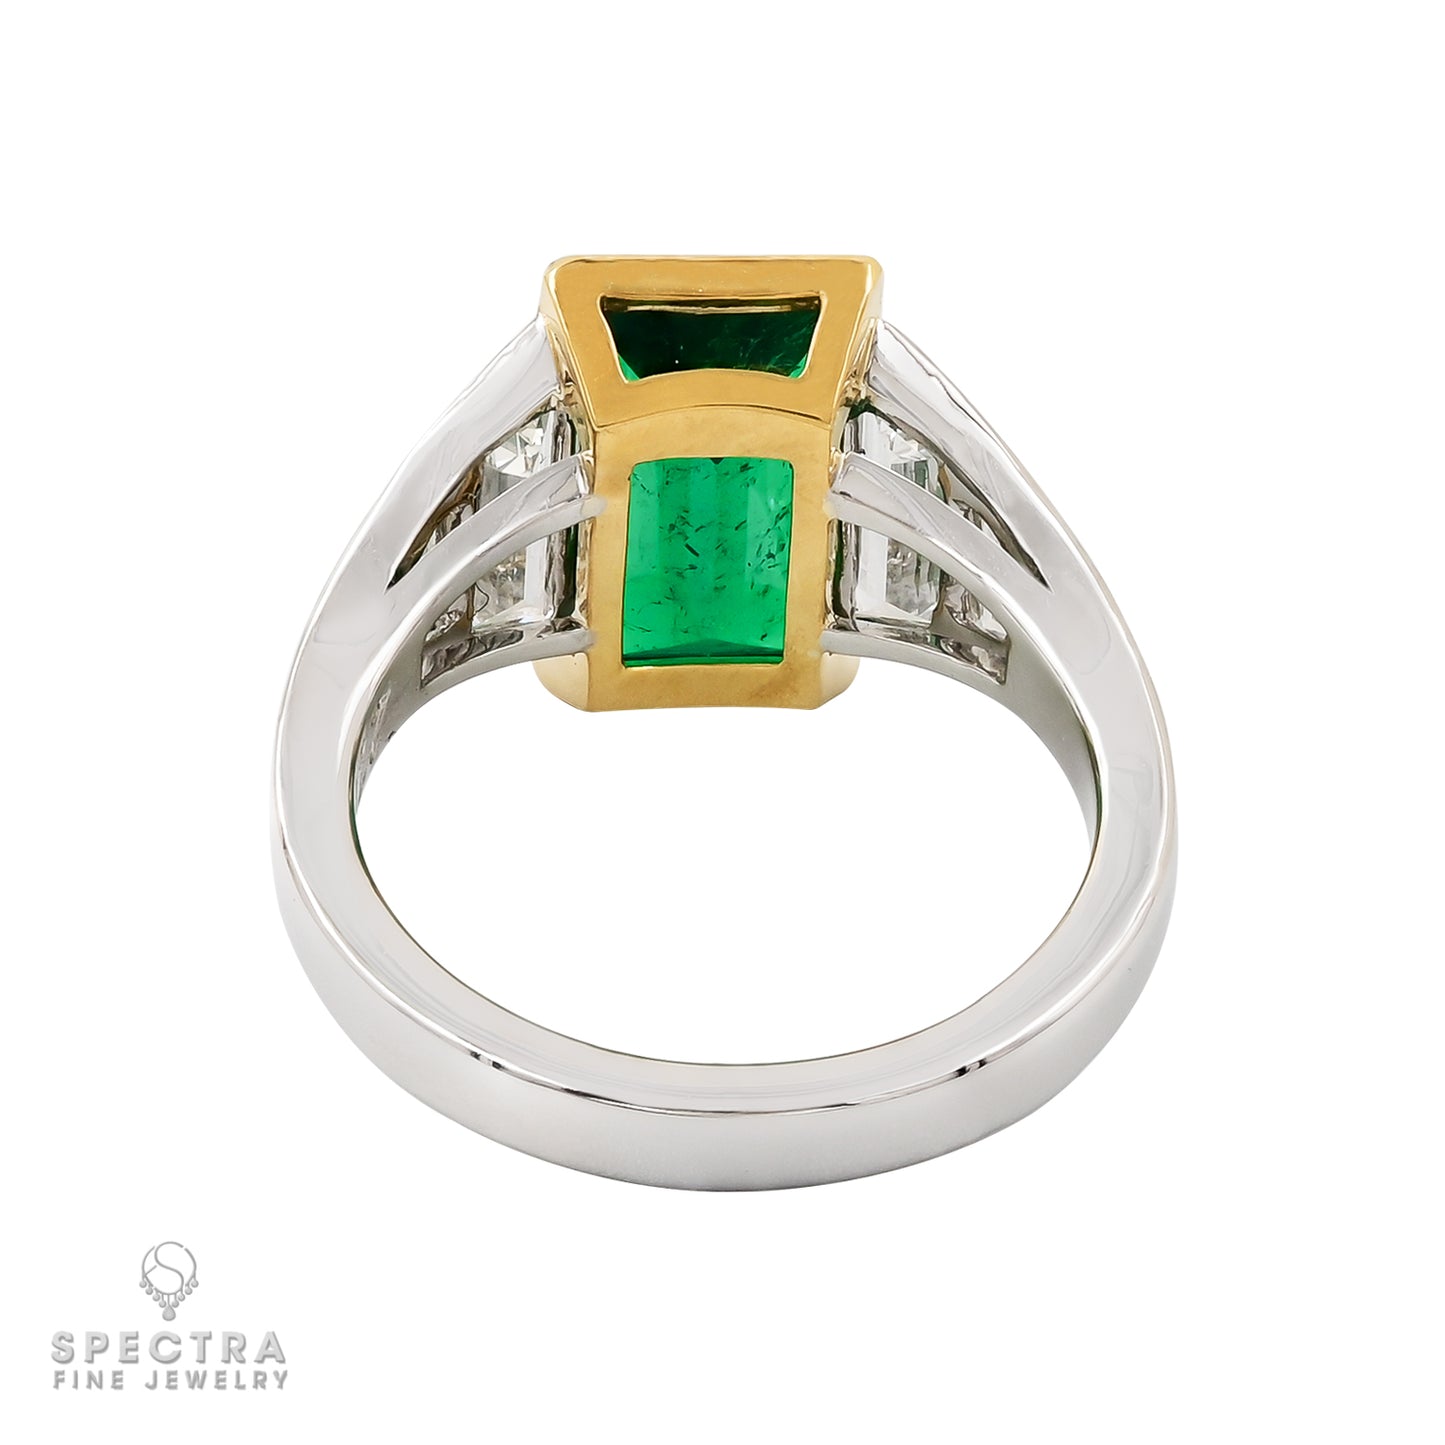 Spectra Fine Jewelry Platinum Colombian Emerald and Trapezoid Diamond Ring